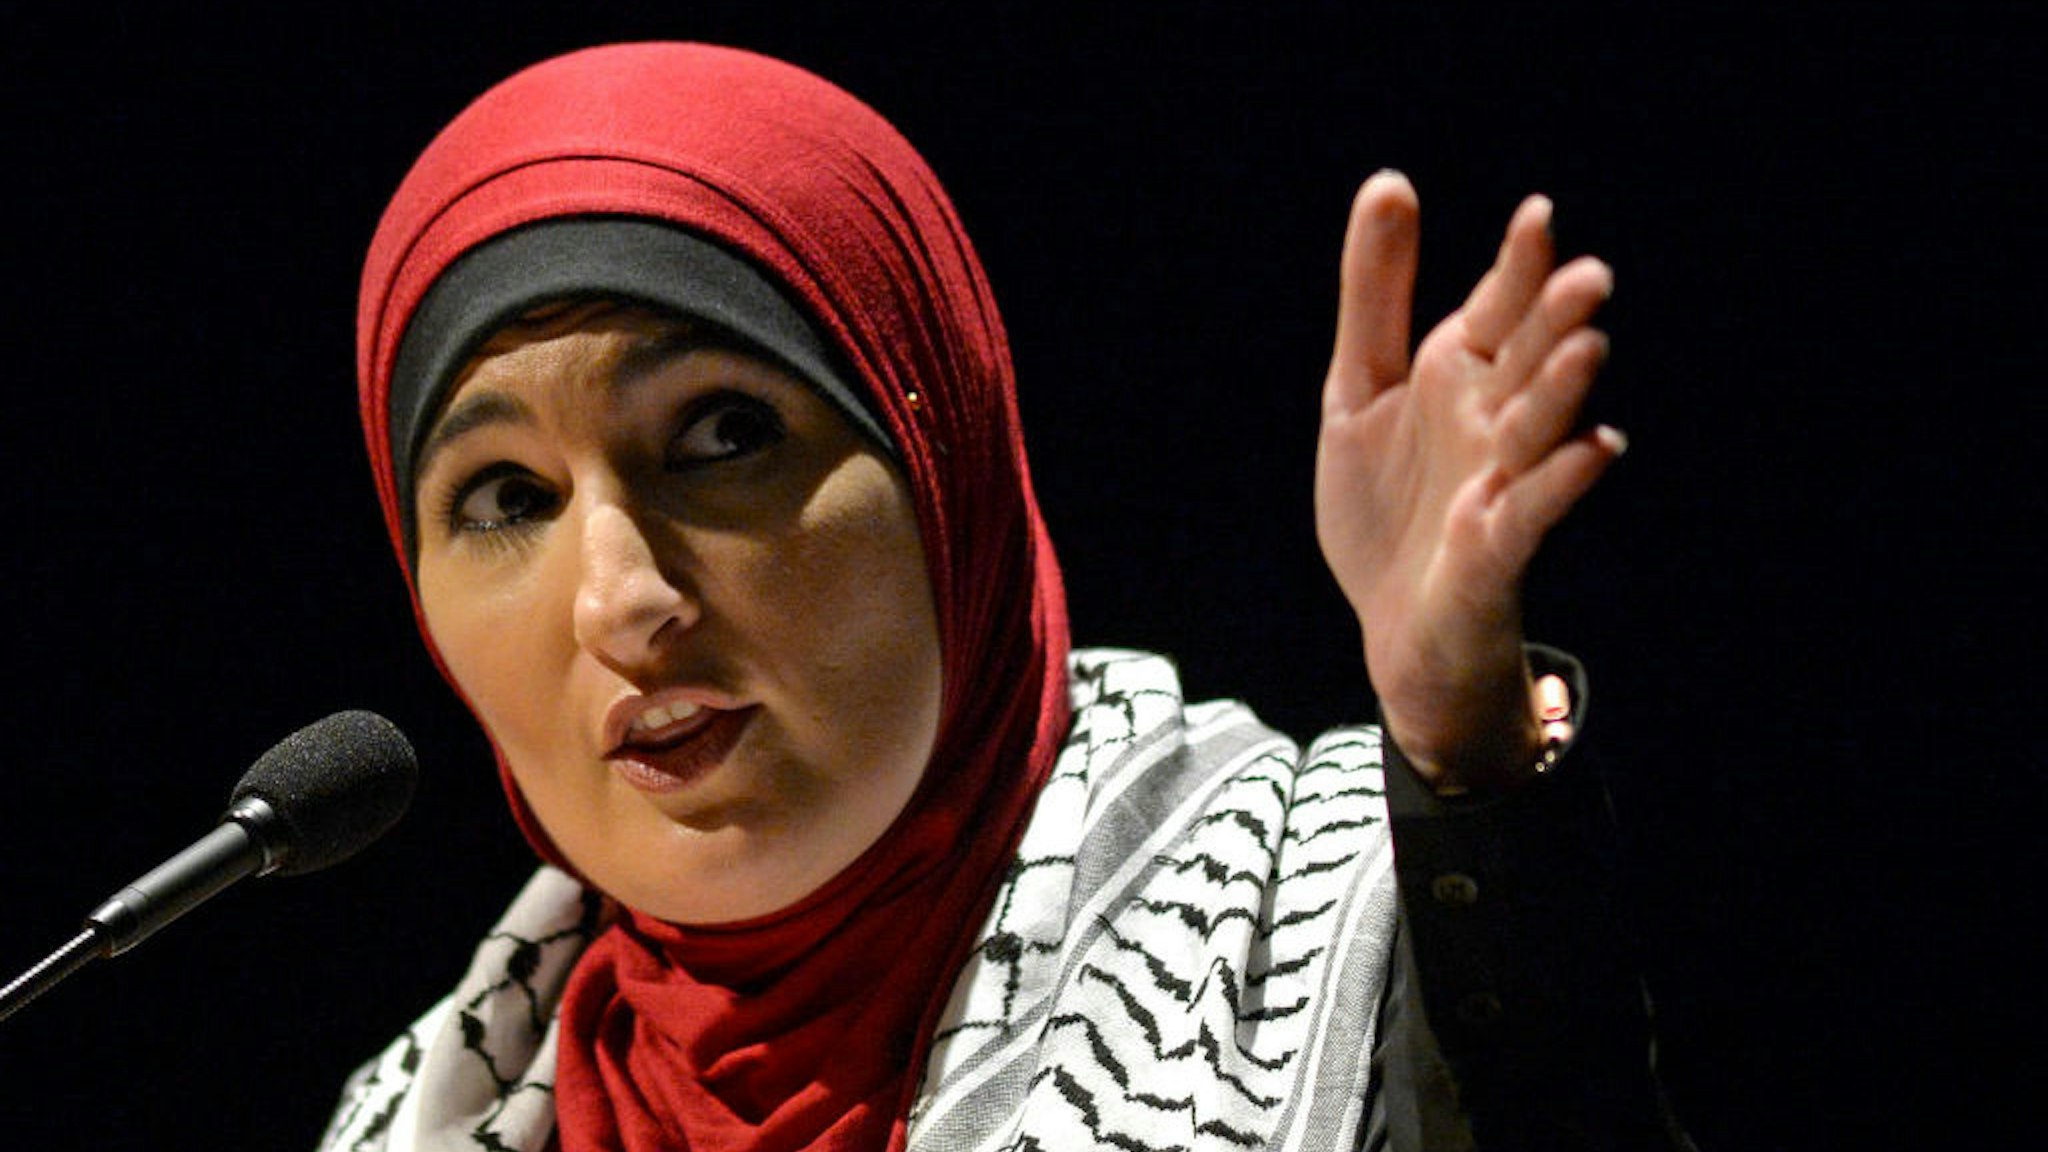 AMHERST, MA - MAY 4: Political activist Linda Sarsour speaks during a panel on free speech and the Israeli-Palestinian conflict at the University of Massachusetts campus in Amherst, Massachusetts on May 4, 2019. (Staff Photo By Christopher Evans/MediaNews Group/Boston Herald via Getty Images)